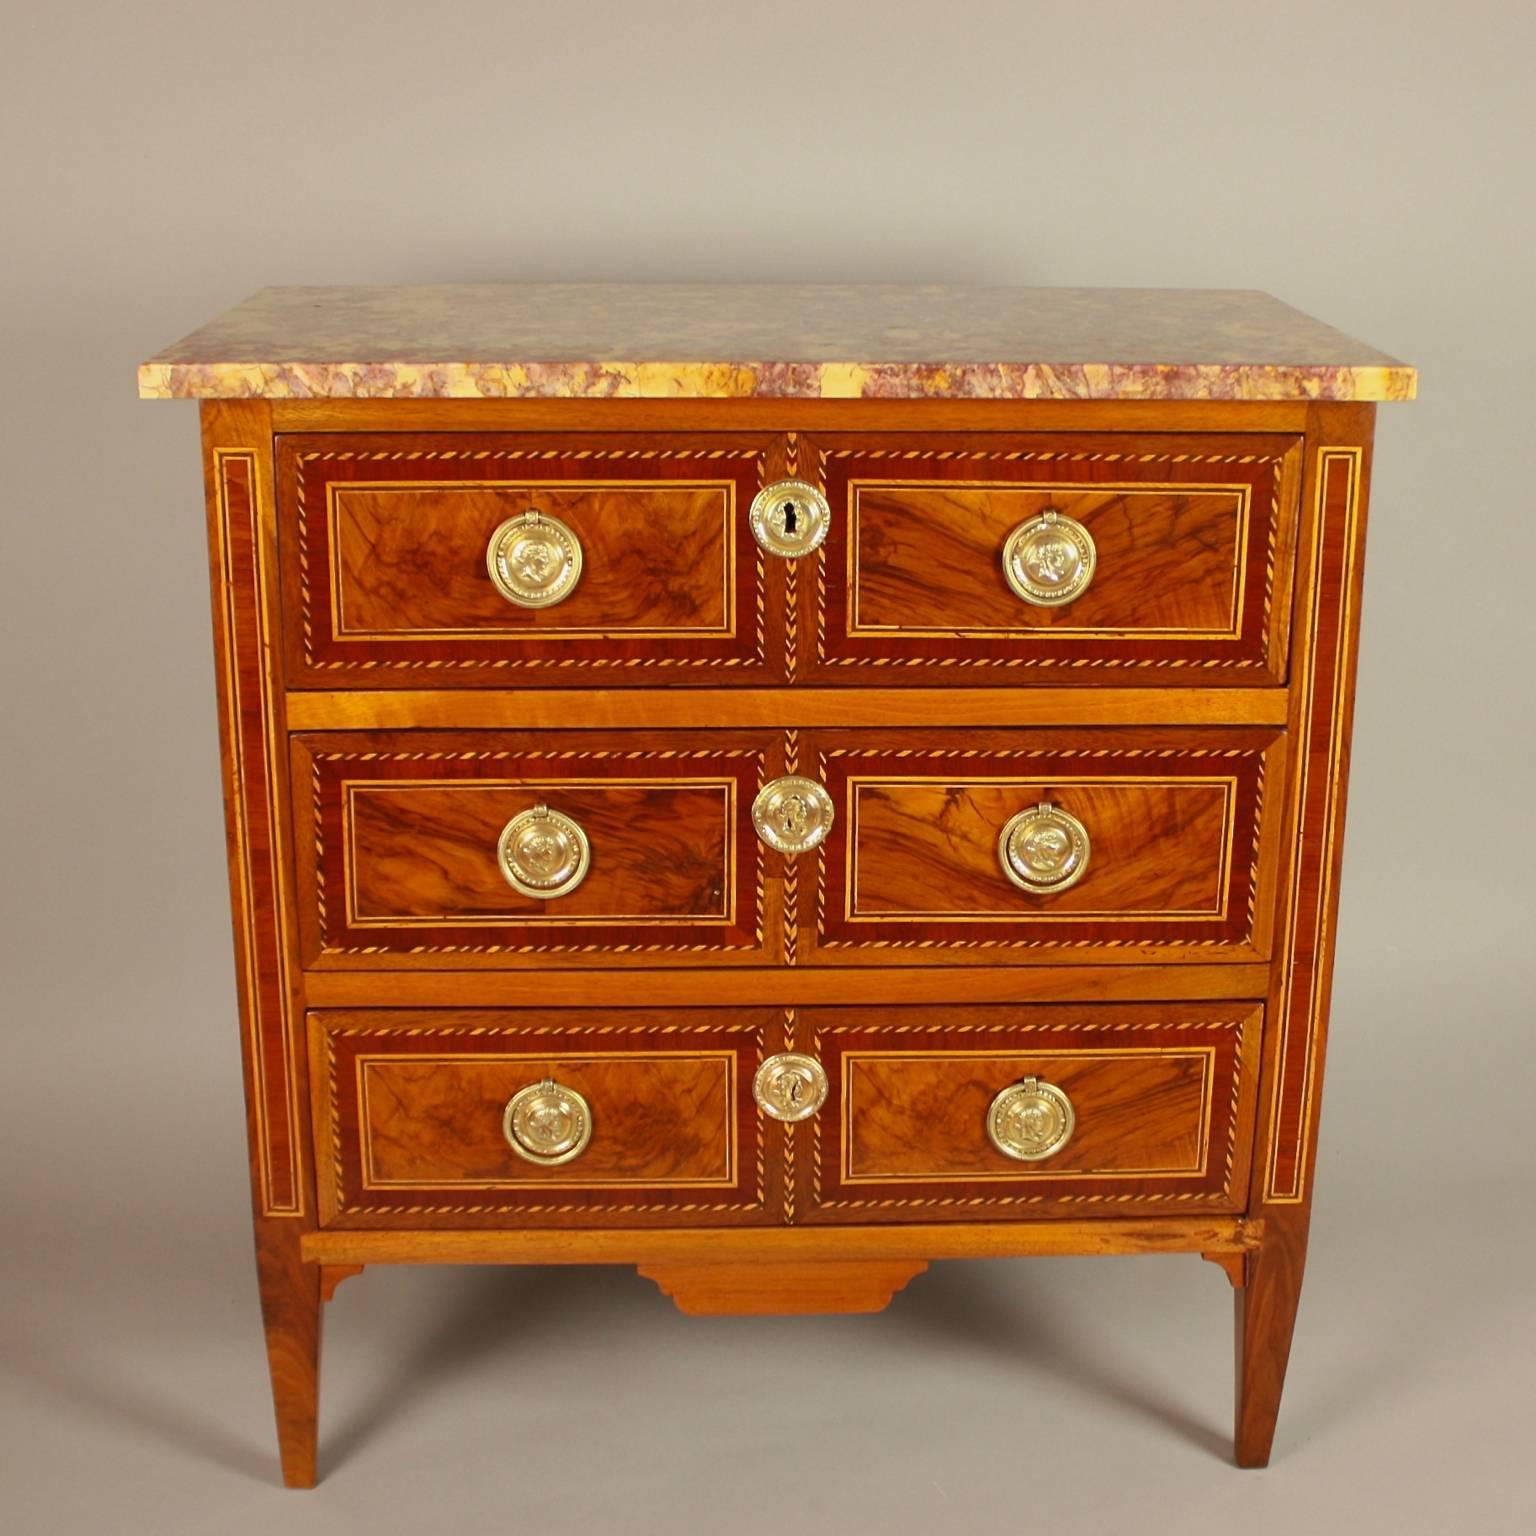 An elegant small Louis XVI marquetry commode or chest of drawer, stamped by Jean Demoulin (1715-1798). With three drawers, each drawer with two walnut panels and inlay banding simulating a twisted rope, the sides similarly veneered. The circular